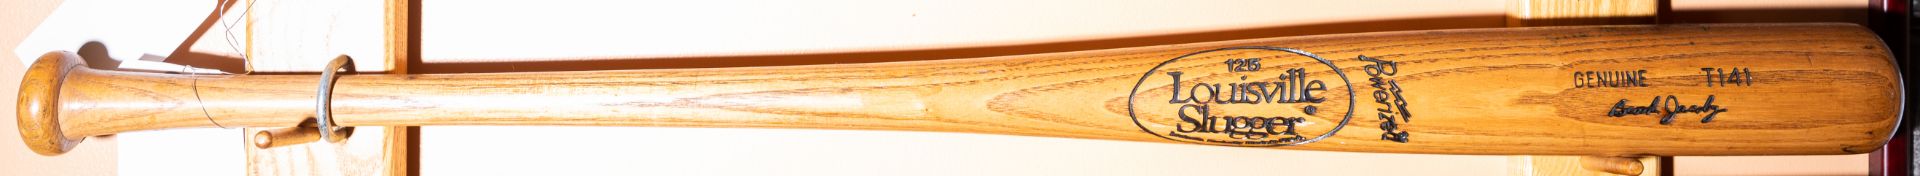 Autographed Louisville Slugger Wood Baseball Bat Stamped and Signed "Brook Jacoby"